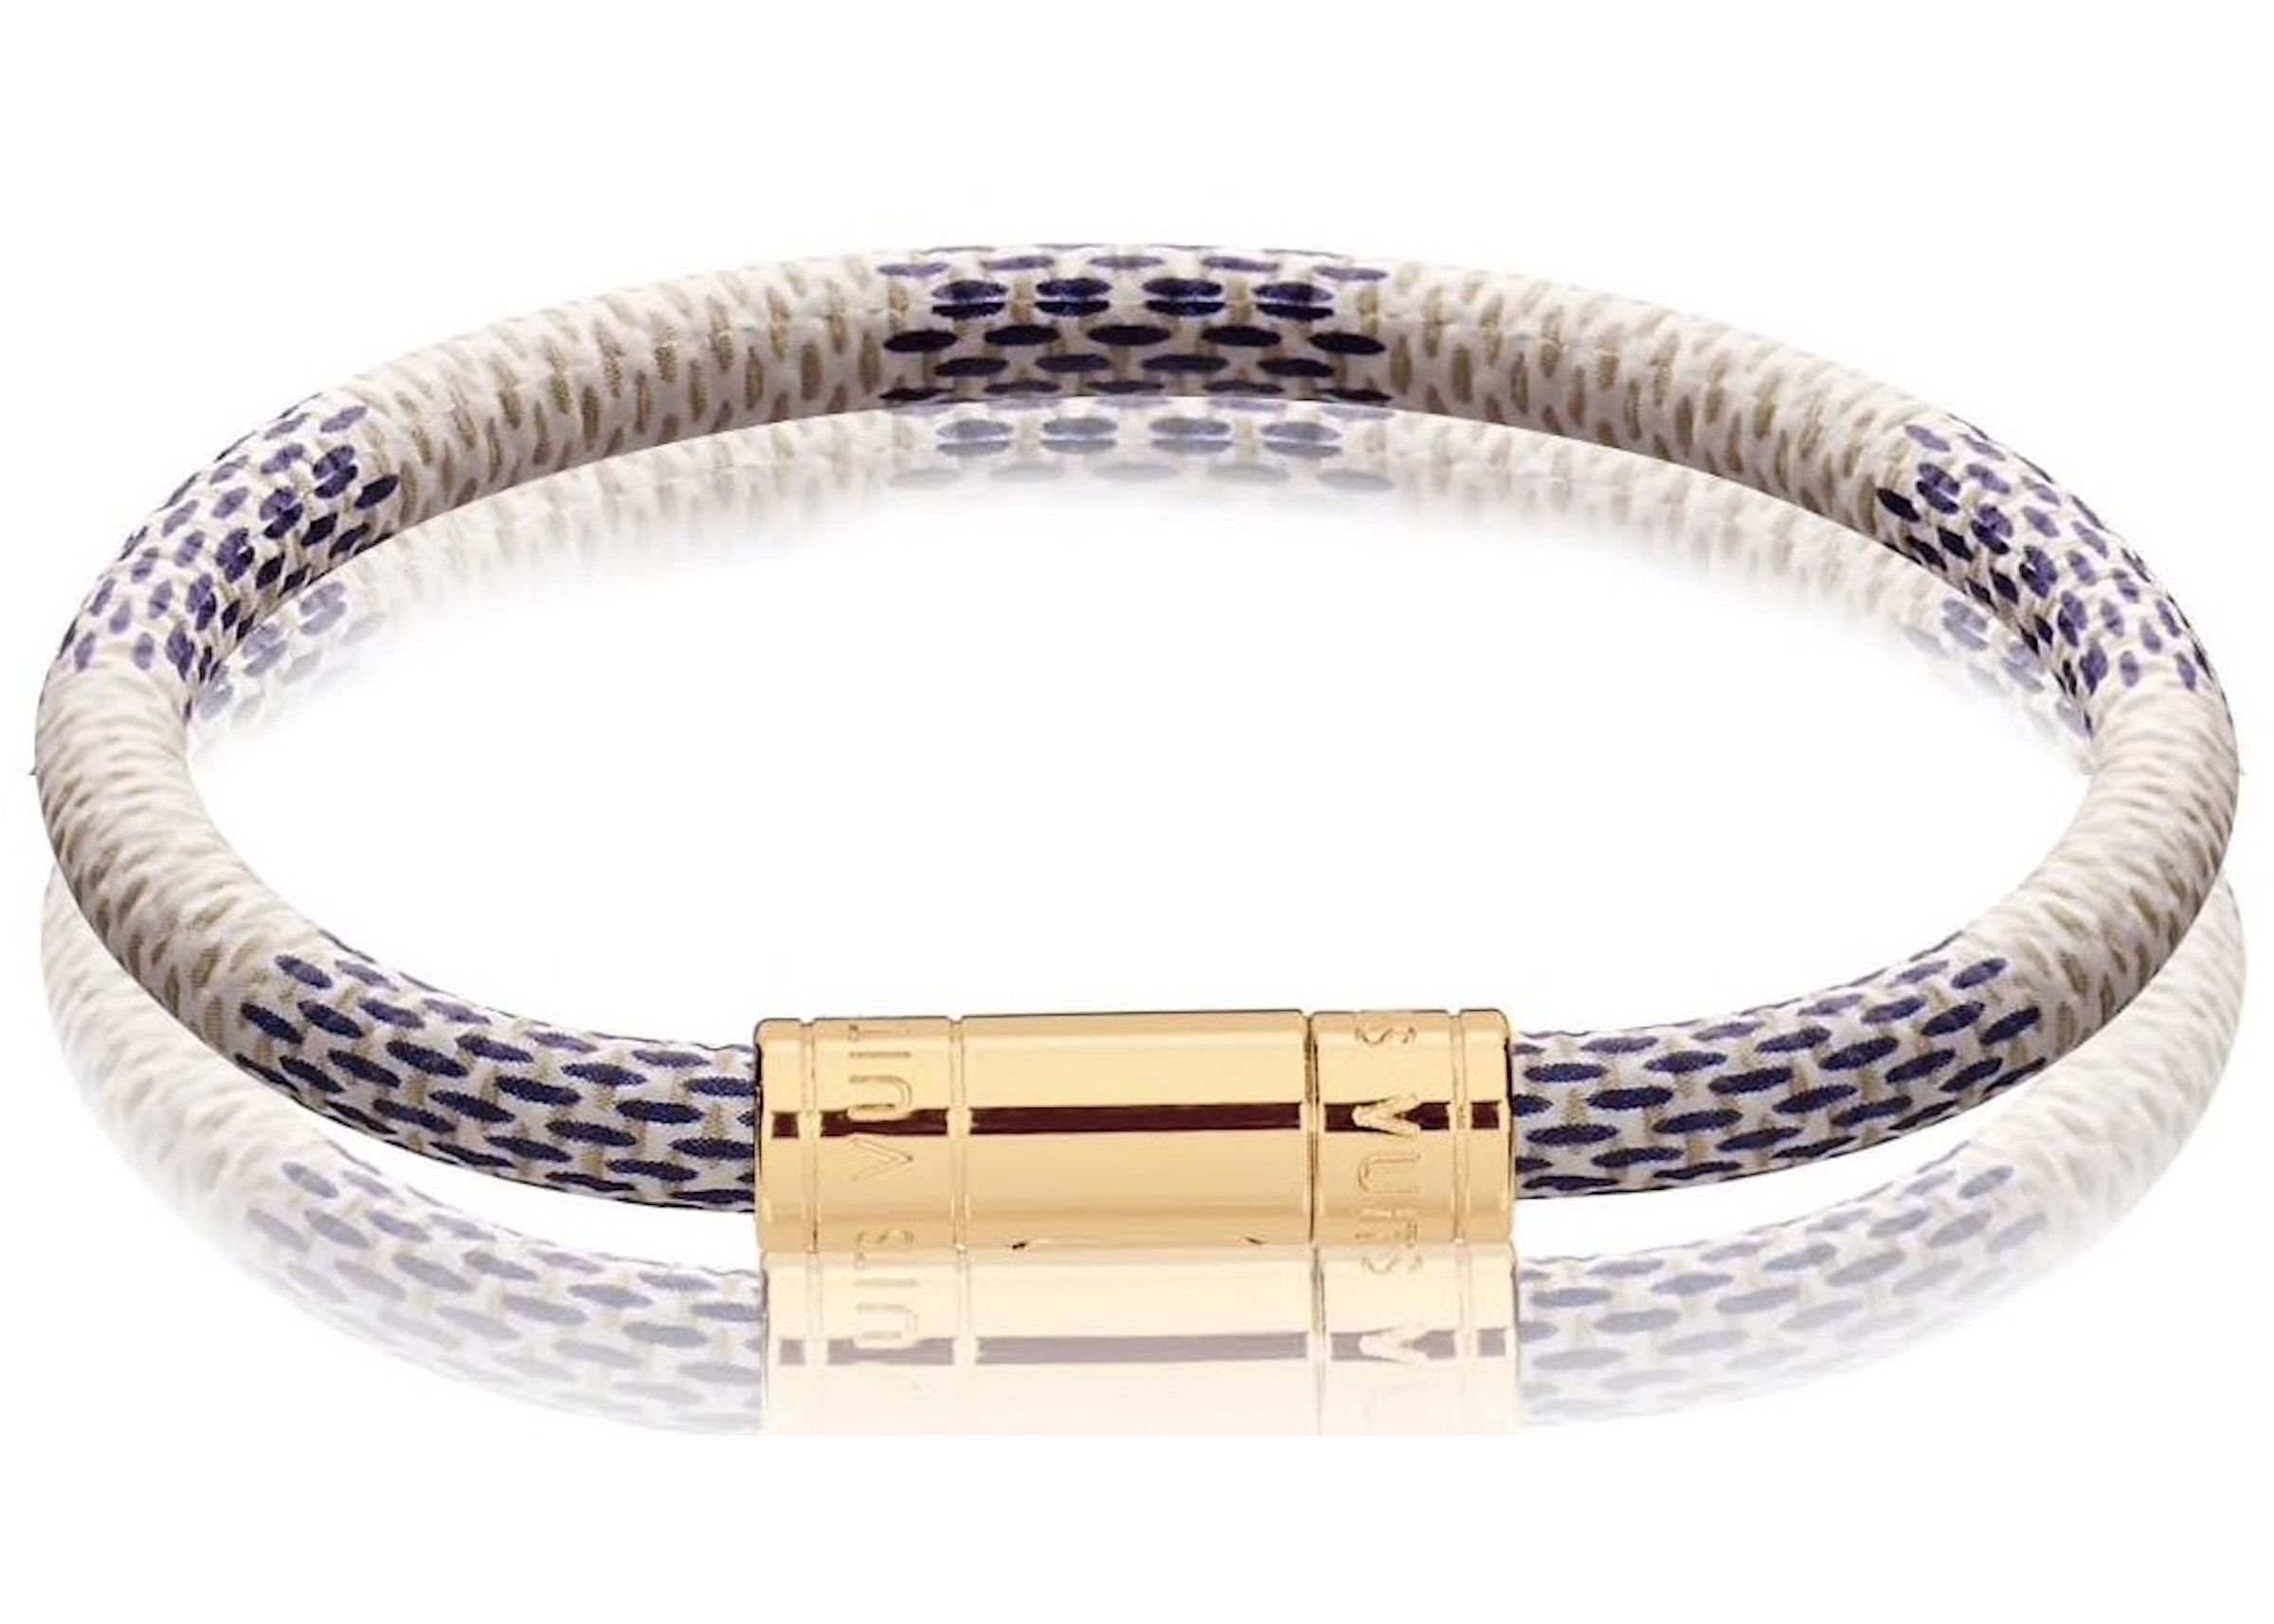 Mindre end personificering Zoologisk have Louis Vuitton Keep It Bracelet Damier Azur White/Blue in Coated Canvas with  Gold-tone - US